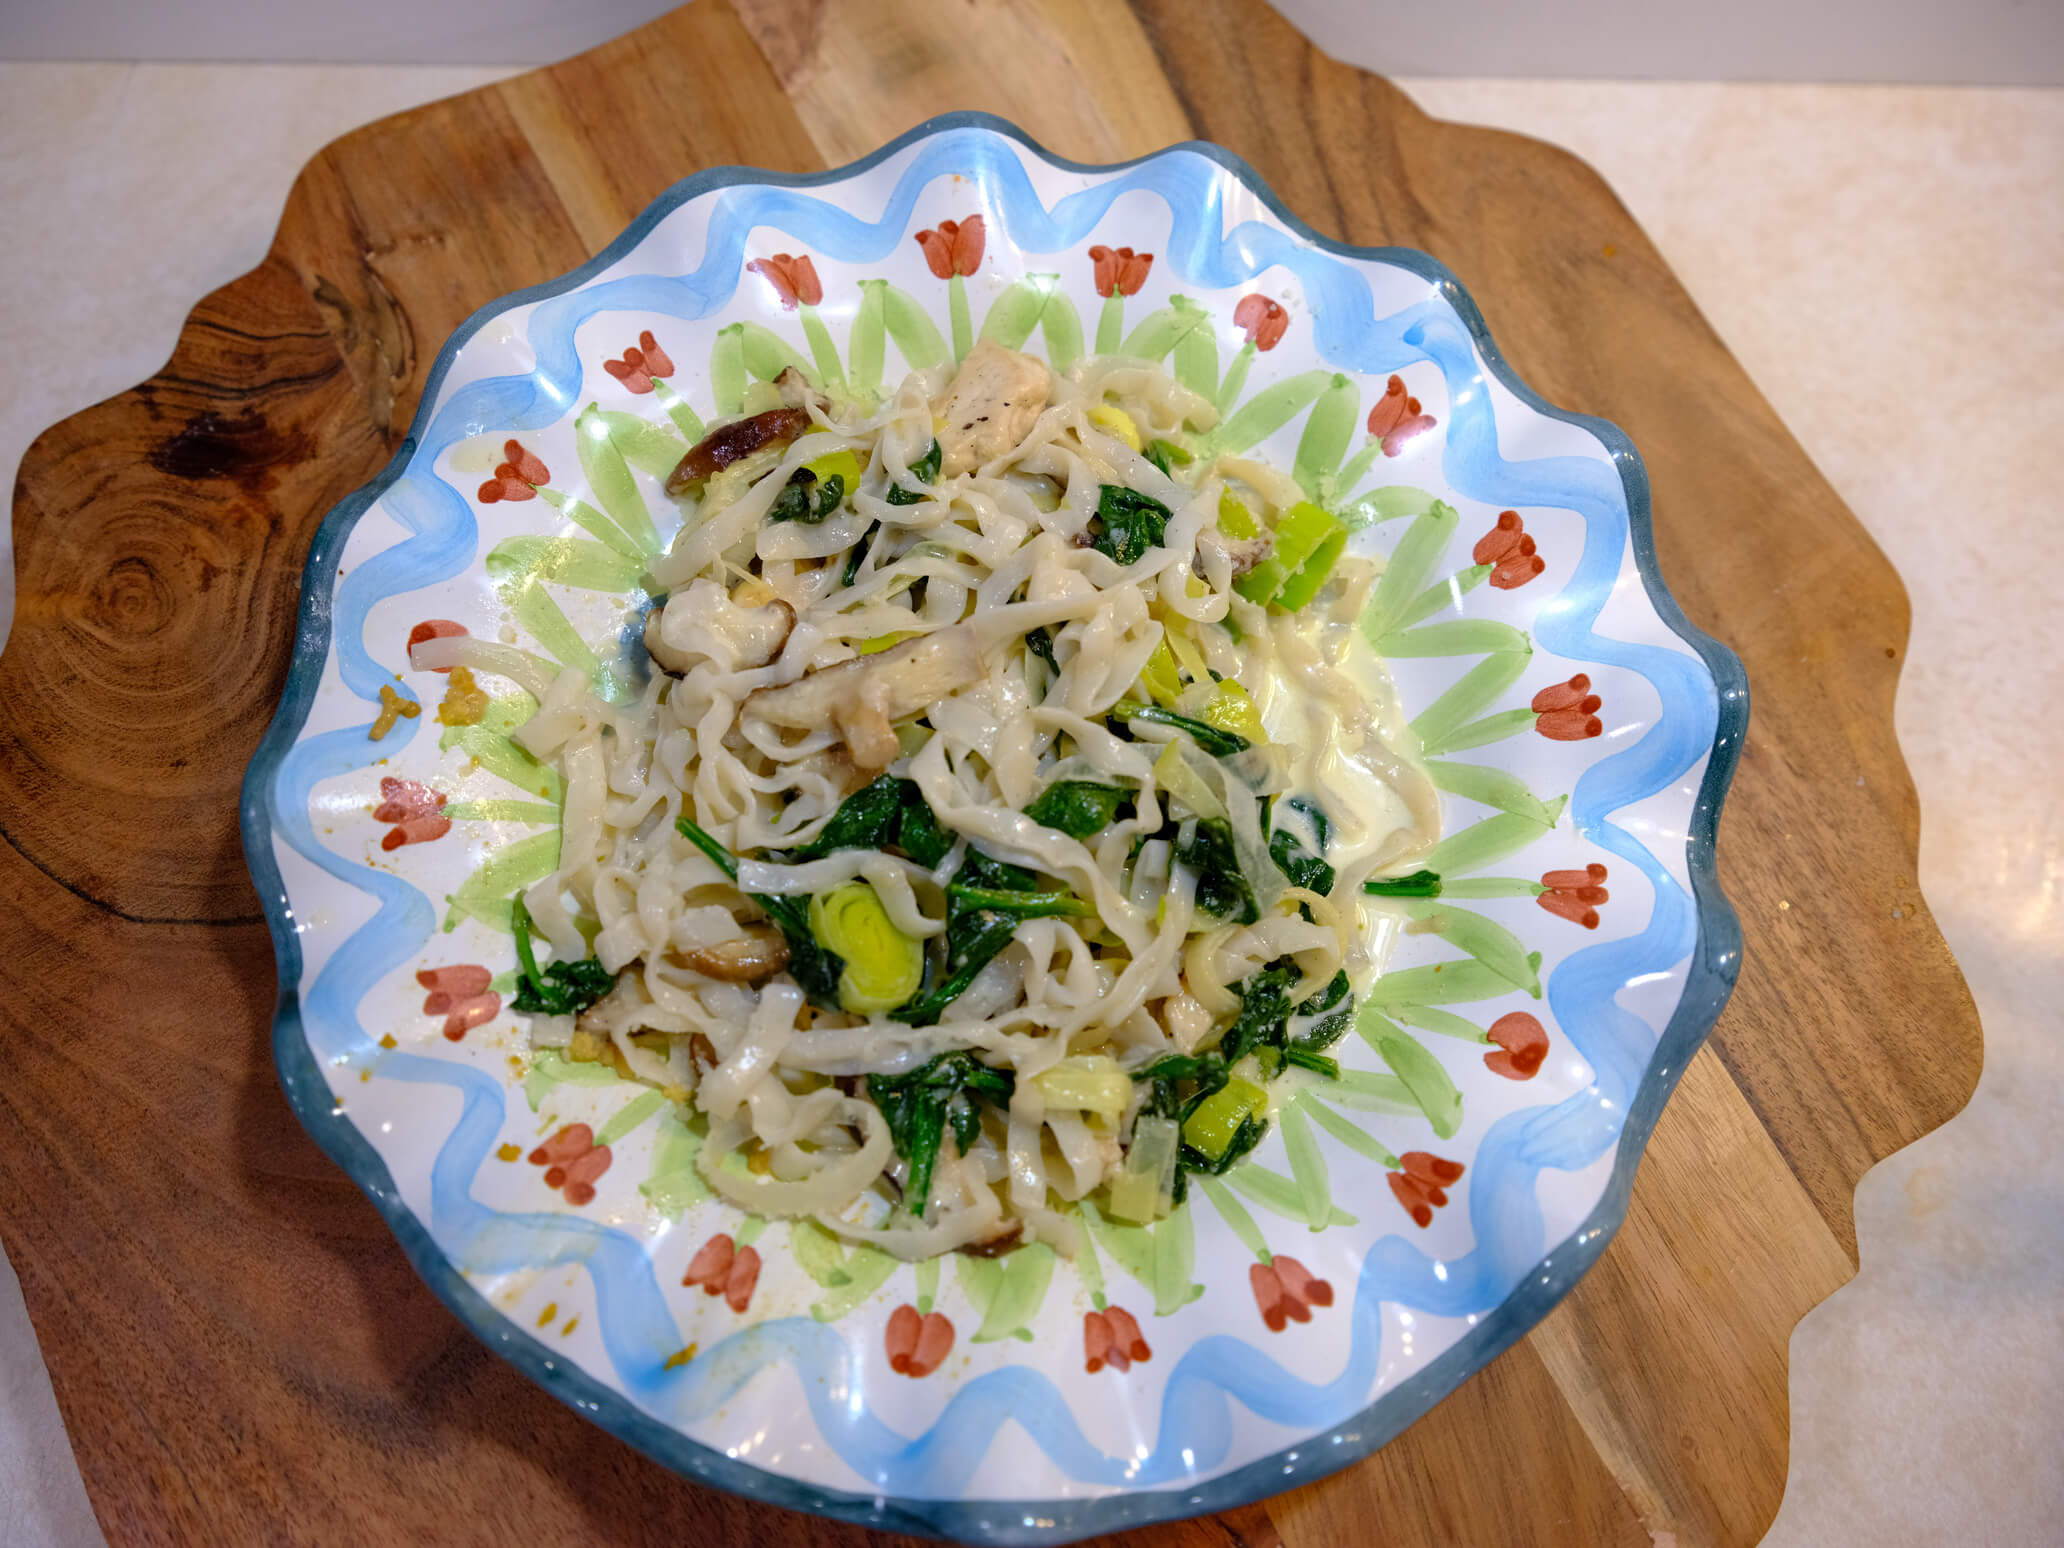 A plate full of Chicken Fettuccine pasta, made with It's Skinny noodles and tender chicken and spinach coated in a creamy sauce.